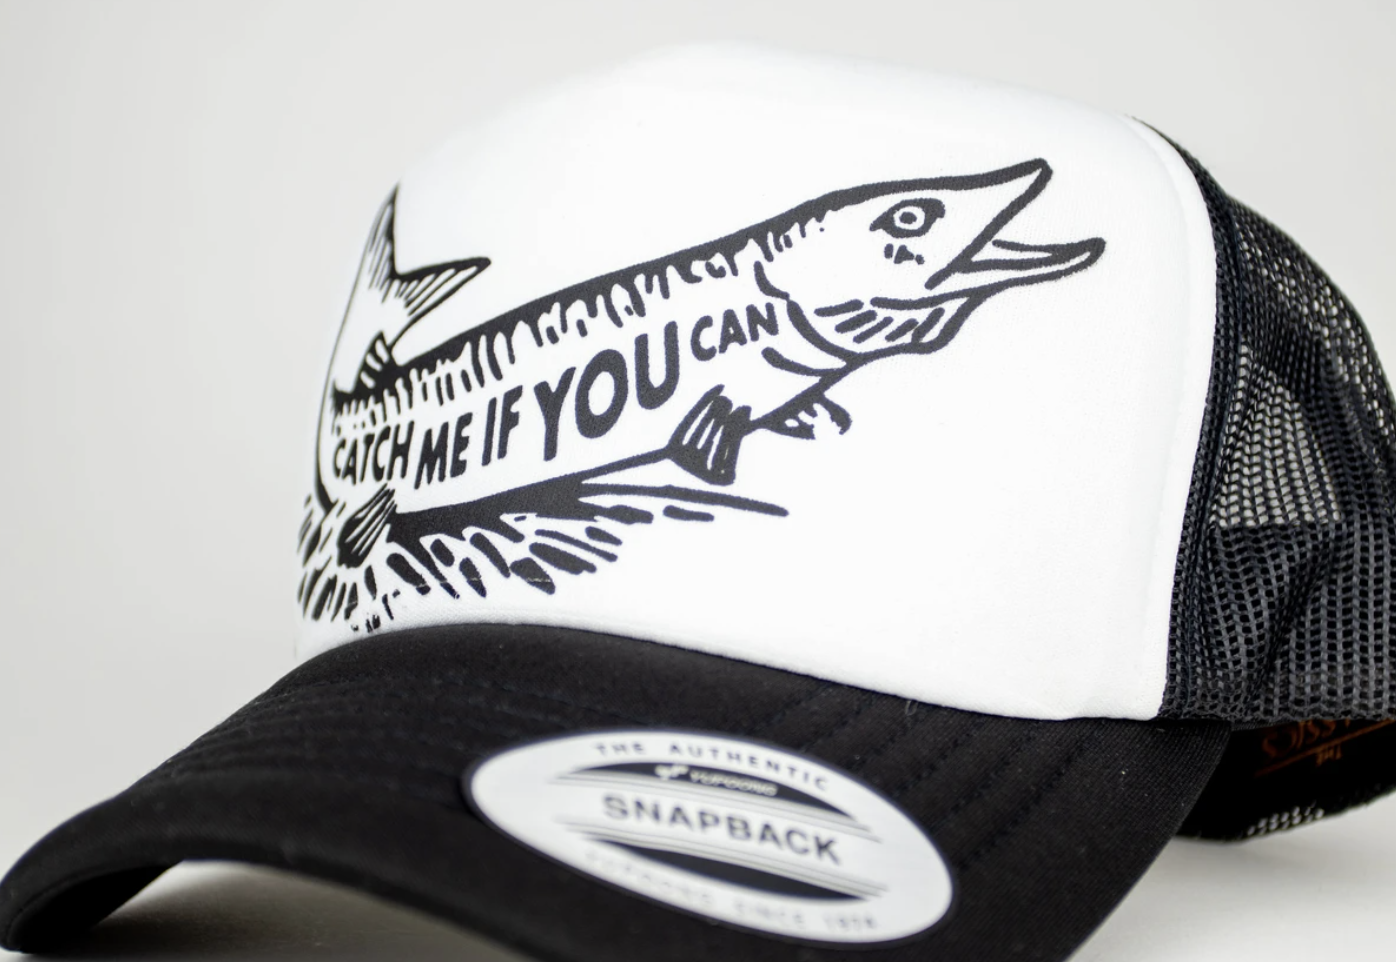 BamBam Fly Guy Catch Me If You Can Hat